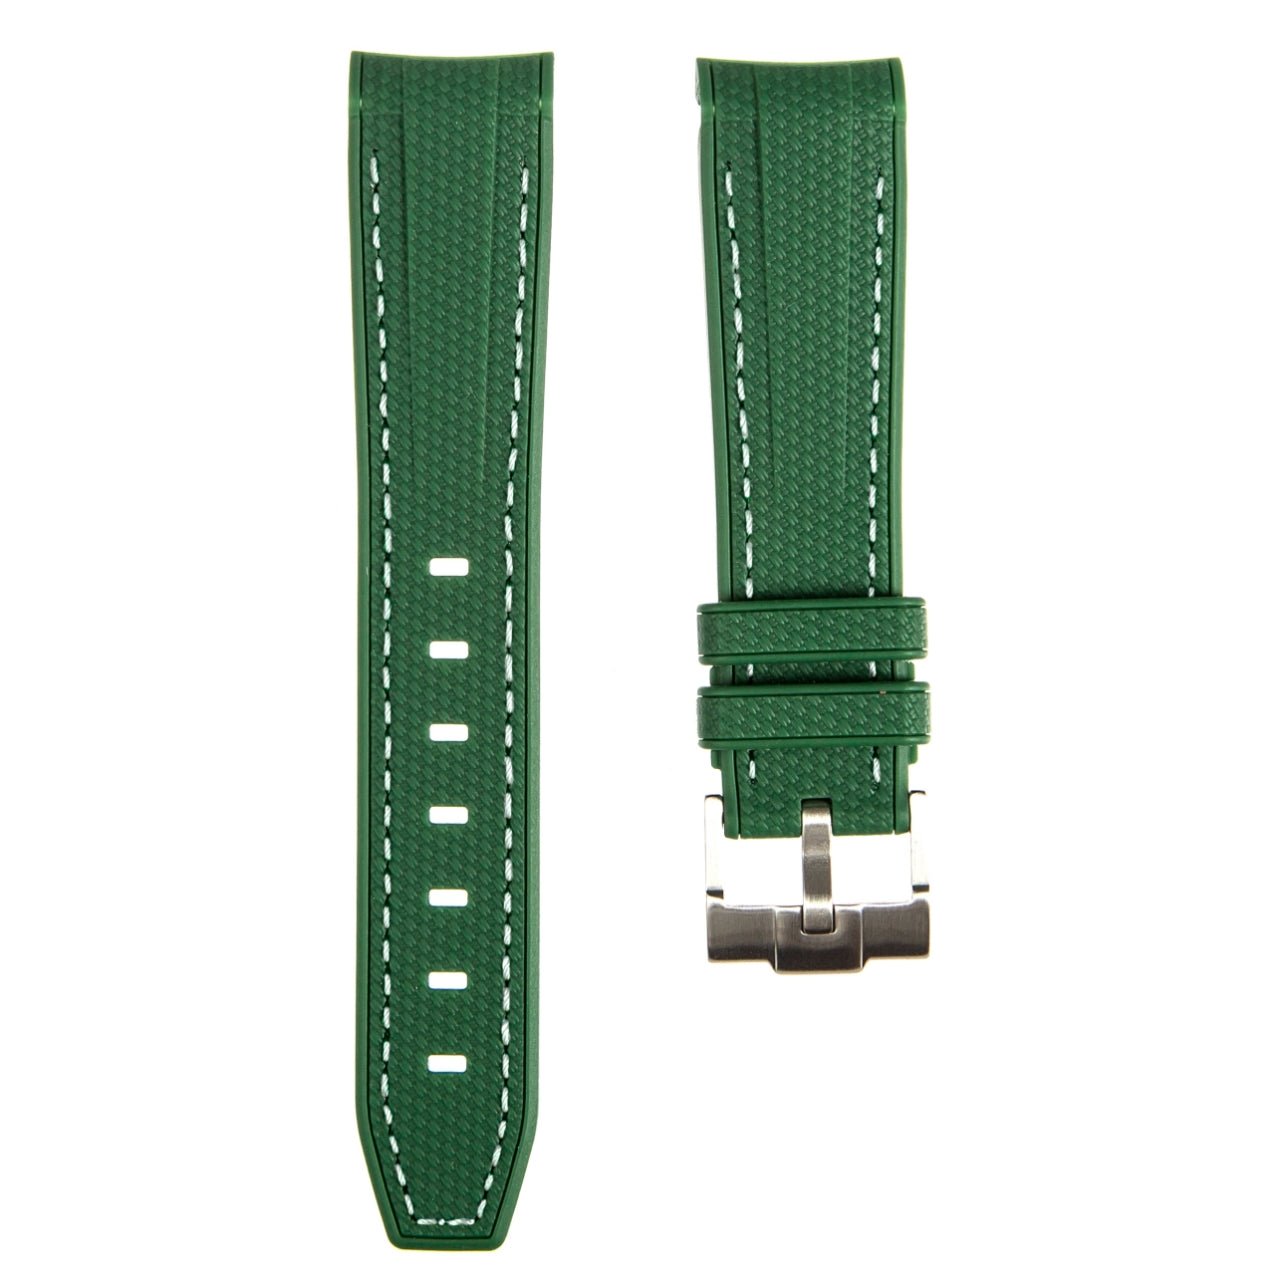 Textured Curved End Premium Silicone Strap - Compatible with Omega x Swatch - Dark Green With White Stitch (2405) -StrapSeeker